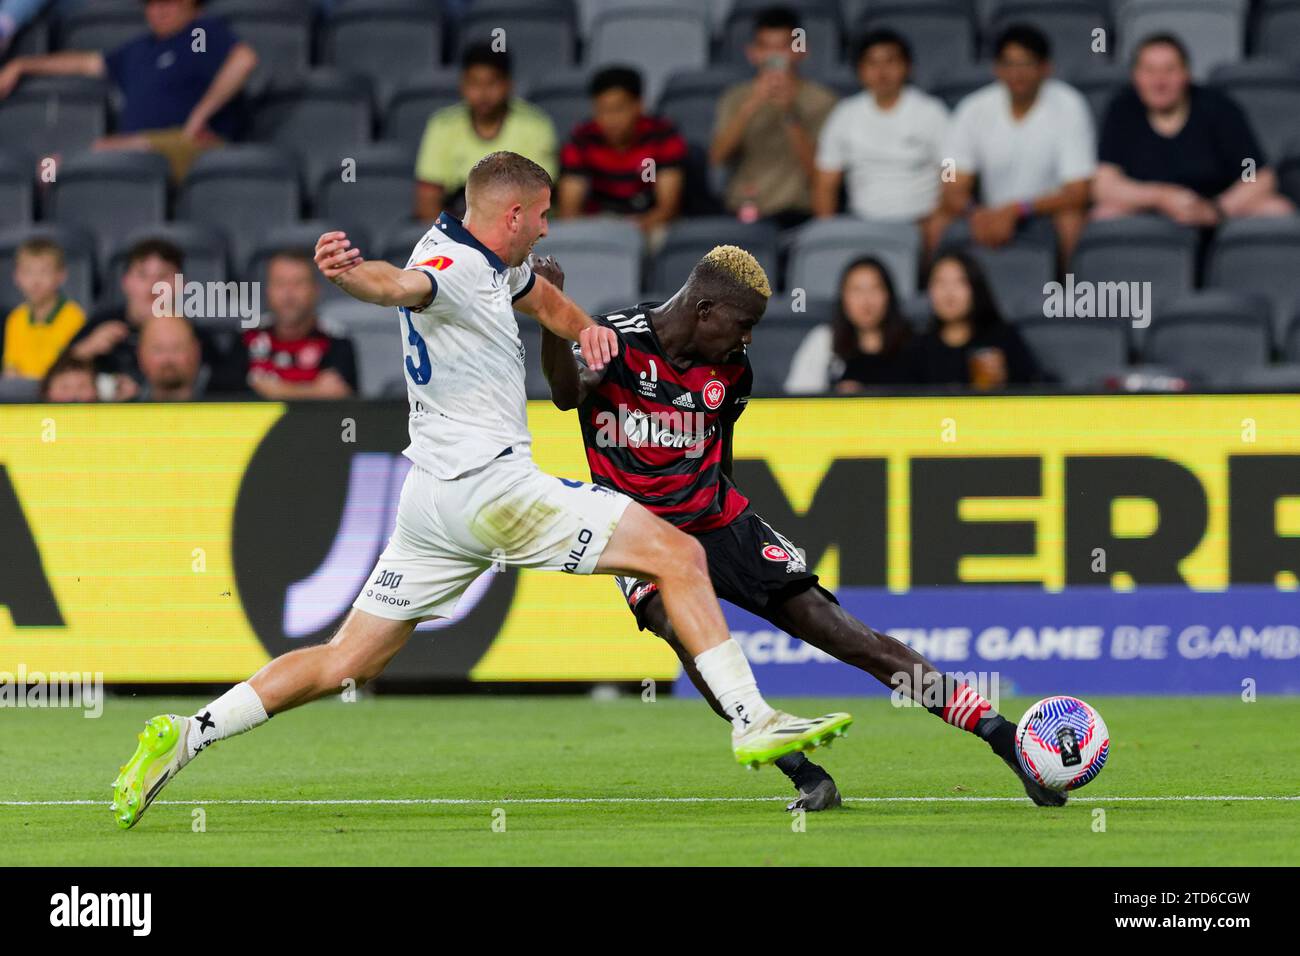 Giuseppe Bovalina of Adelaide United competes for the ball with Valentino Yuel of the Wanderers during the A-League Men Rd8 between the Wanderers and Stock Photo